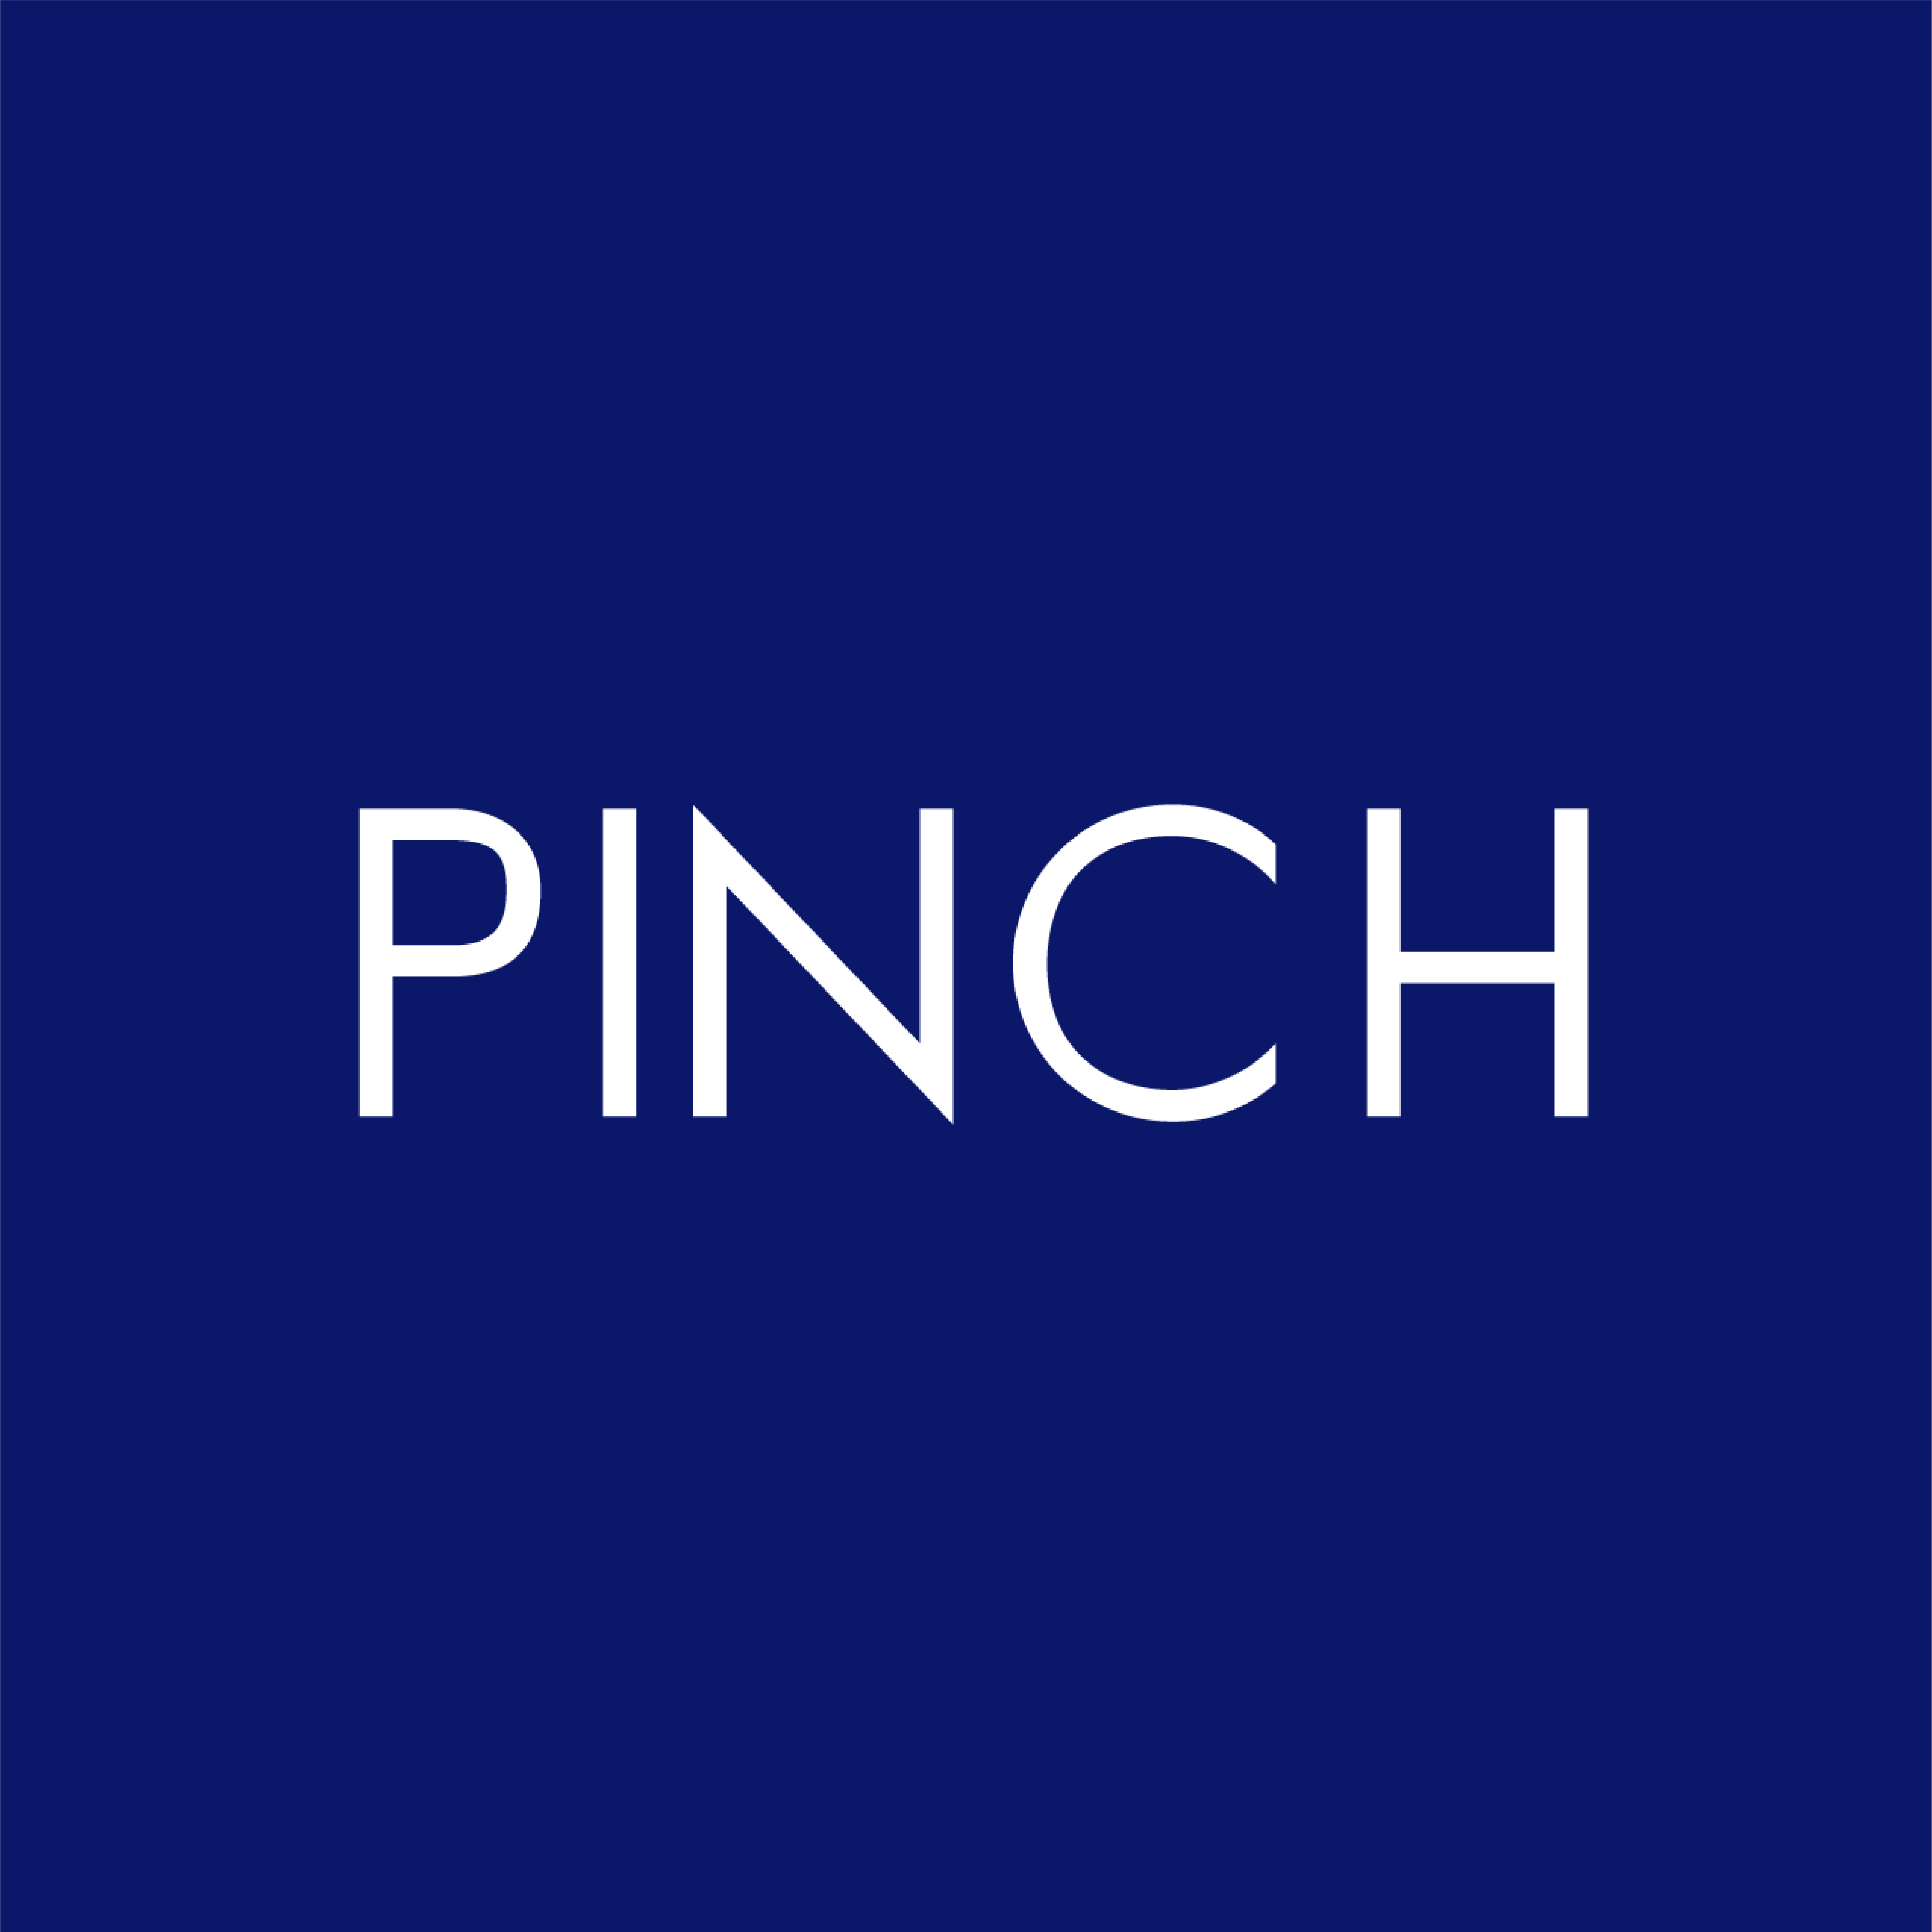 Pinch Job, free to download in the Apple App and Google Play stores